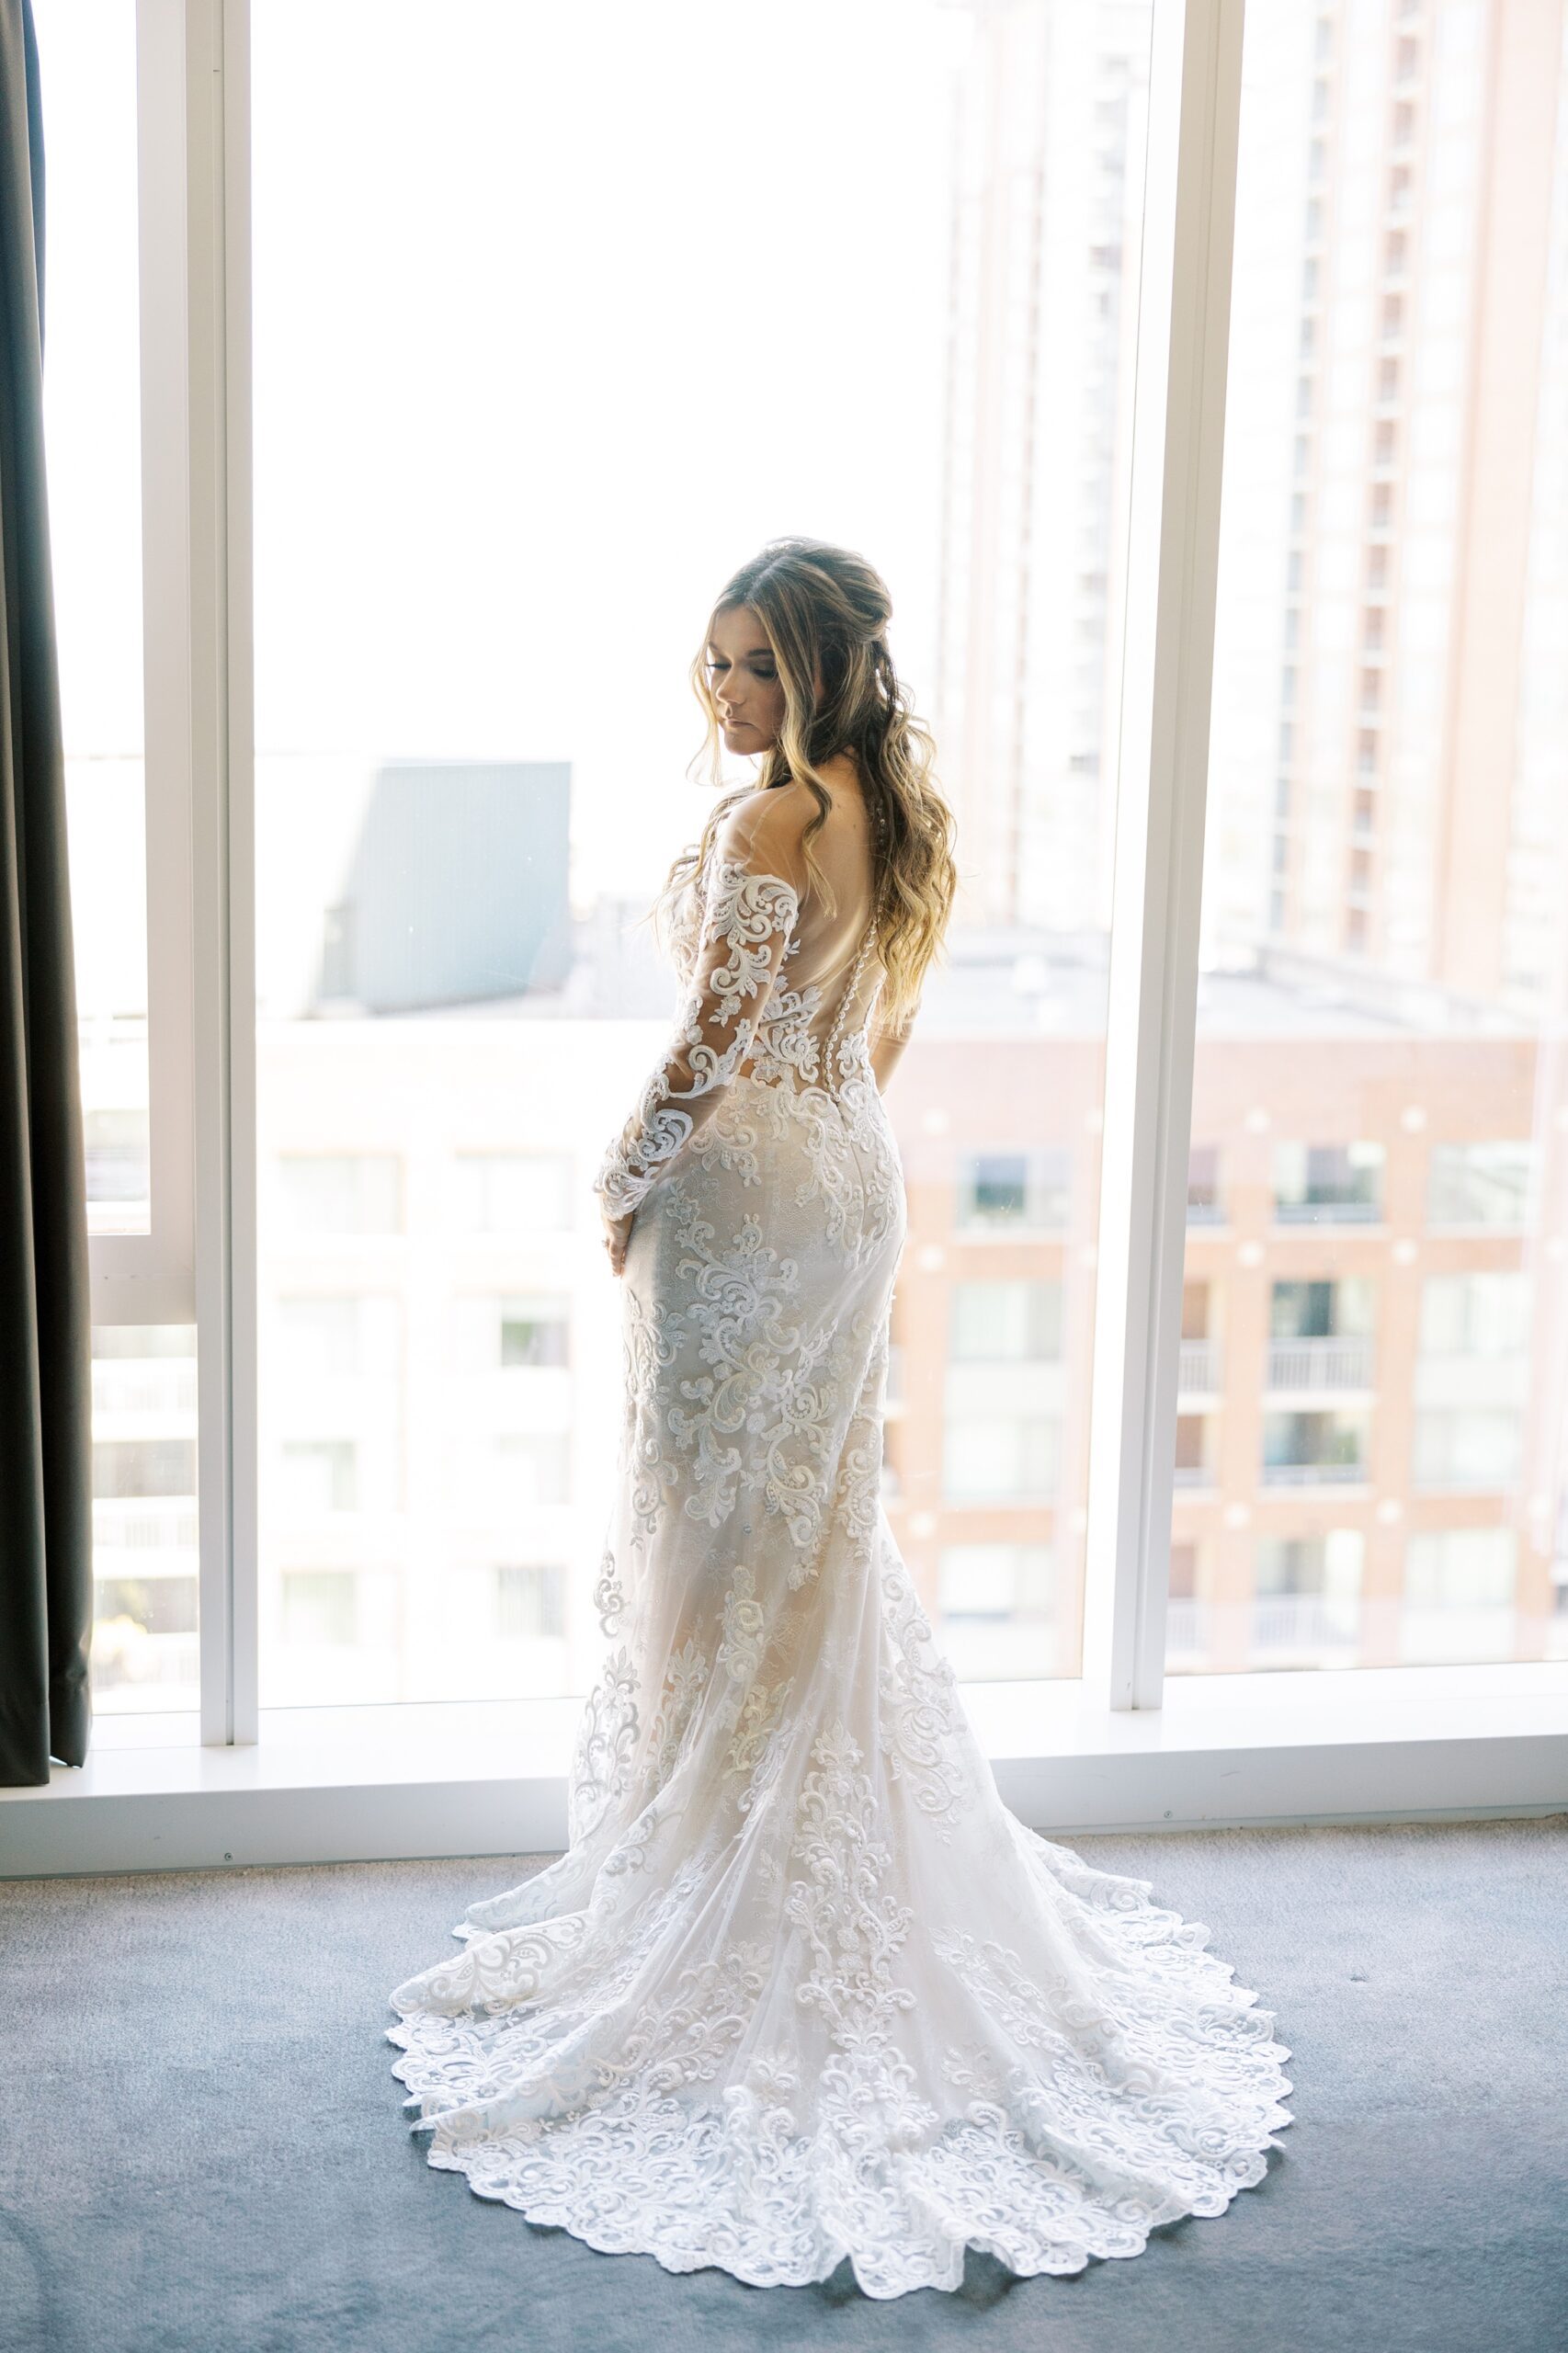 Bride got ready for the wedding at a Chicago hotel